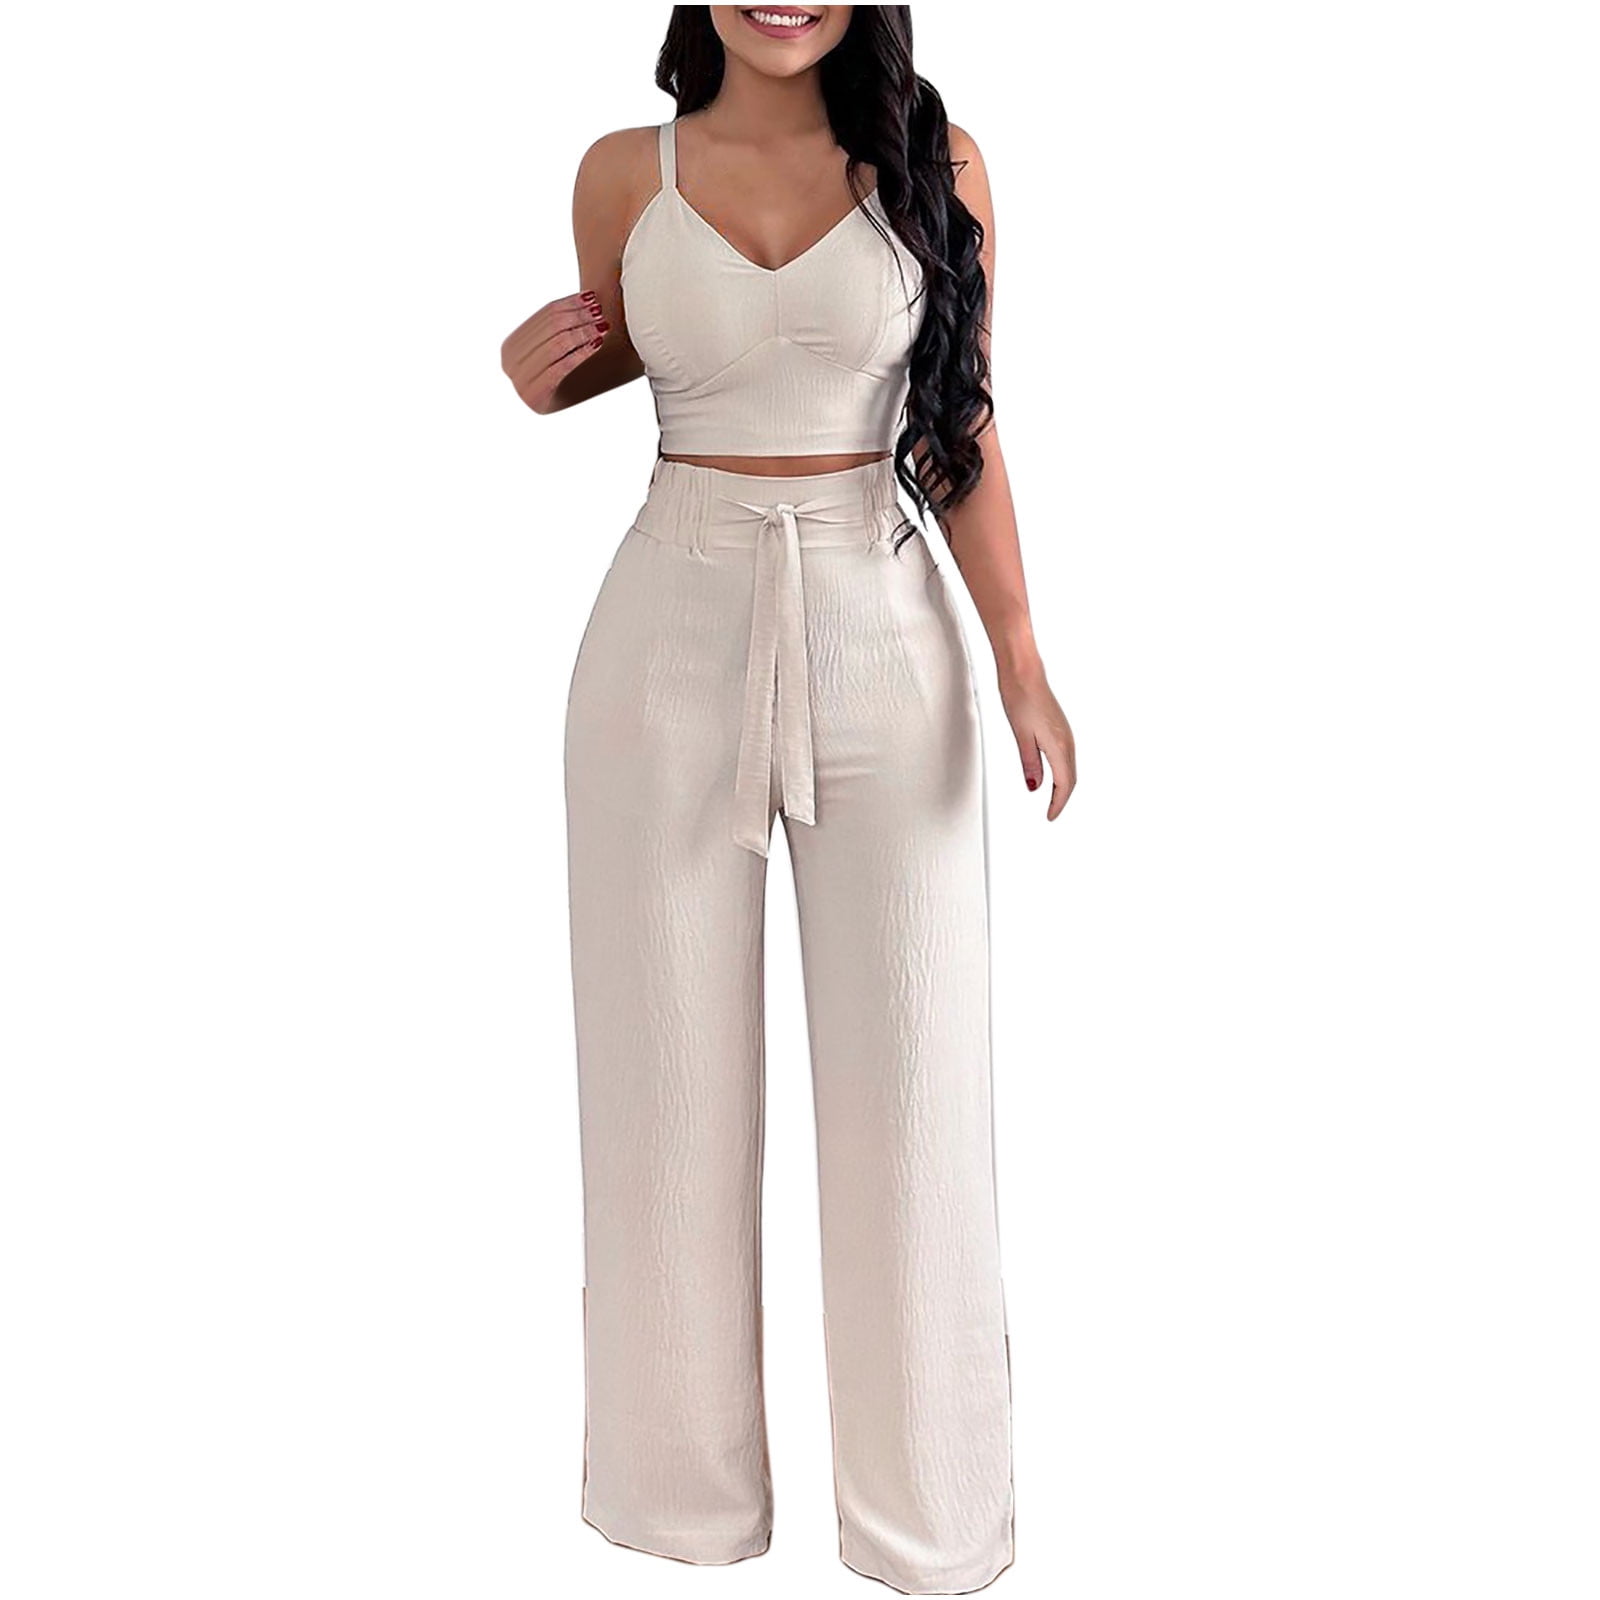 REORIAFEE Vacation Outfits for Women Set Festival Outfits Women's Two Piece  Cotton Linen Pleated Suspender Top Wide Leg Pants Fashion Casual Set Beige